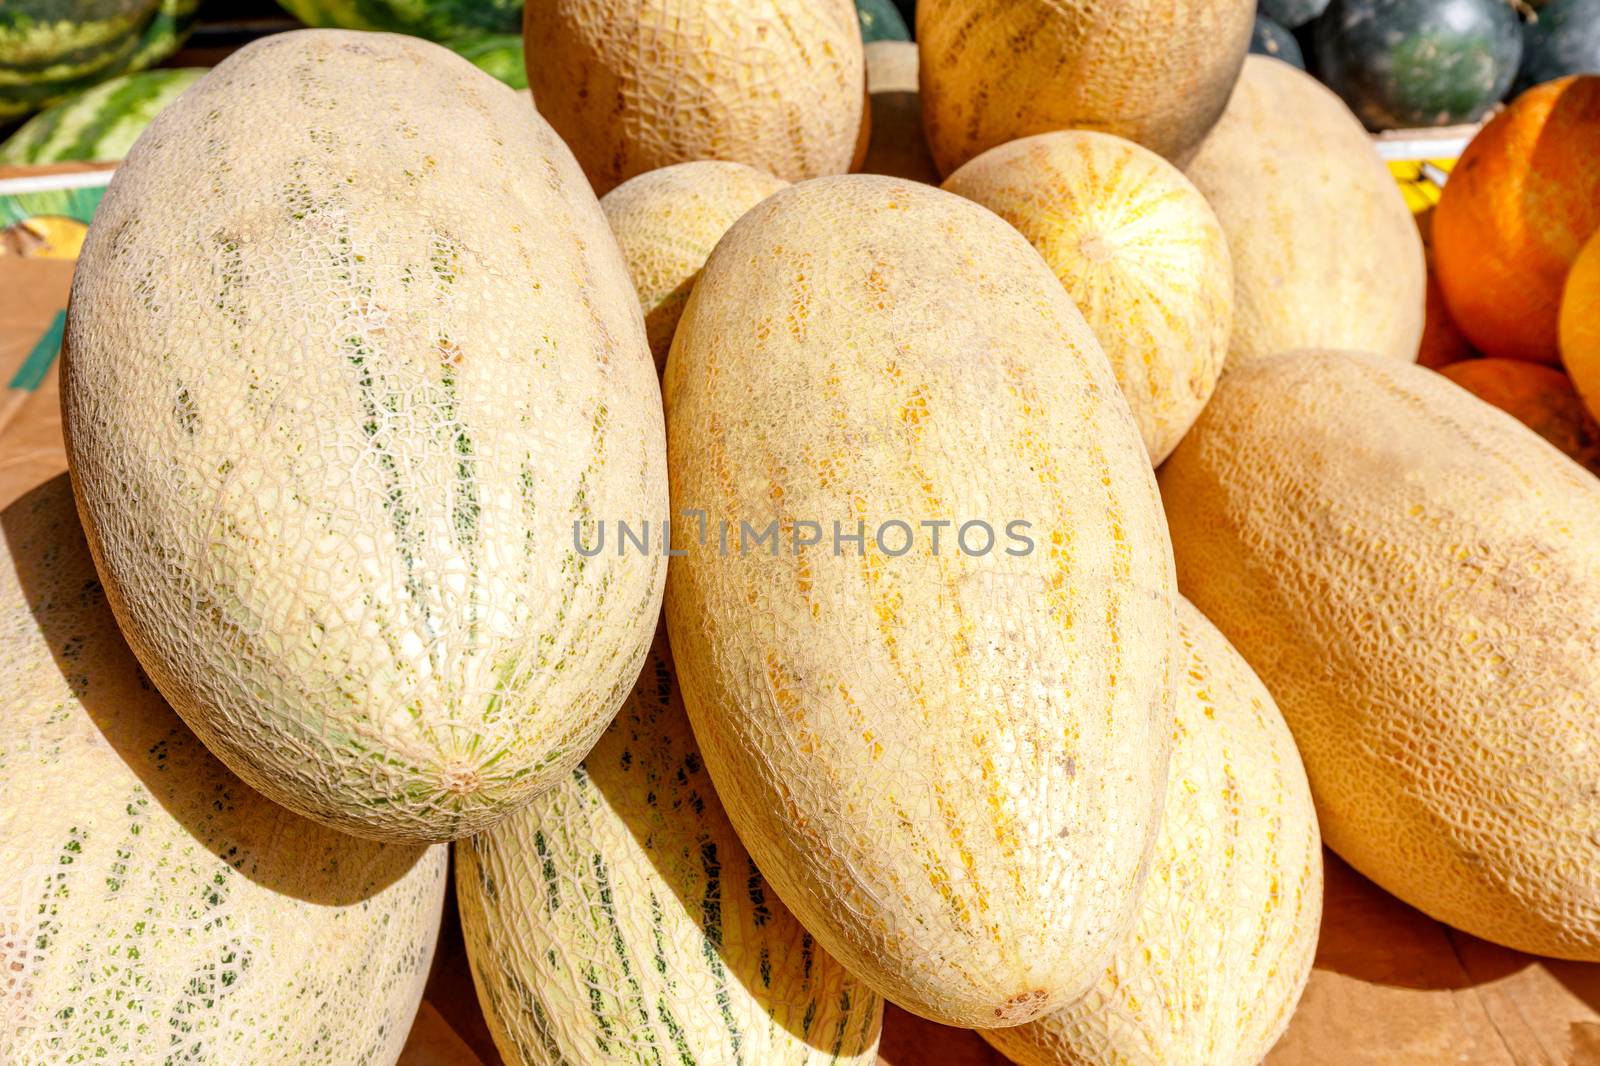 Sweet yellow elongated melons on the market counter. A large number of delicious melons in a stack, selective focus.